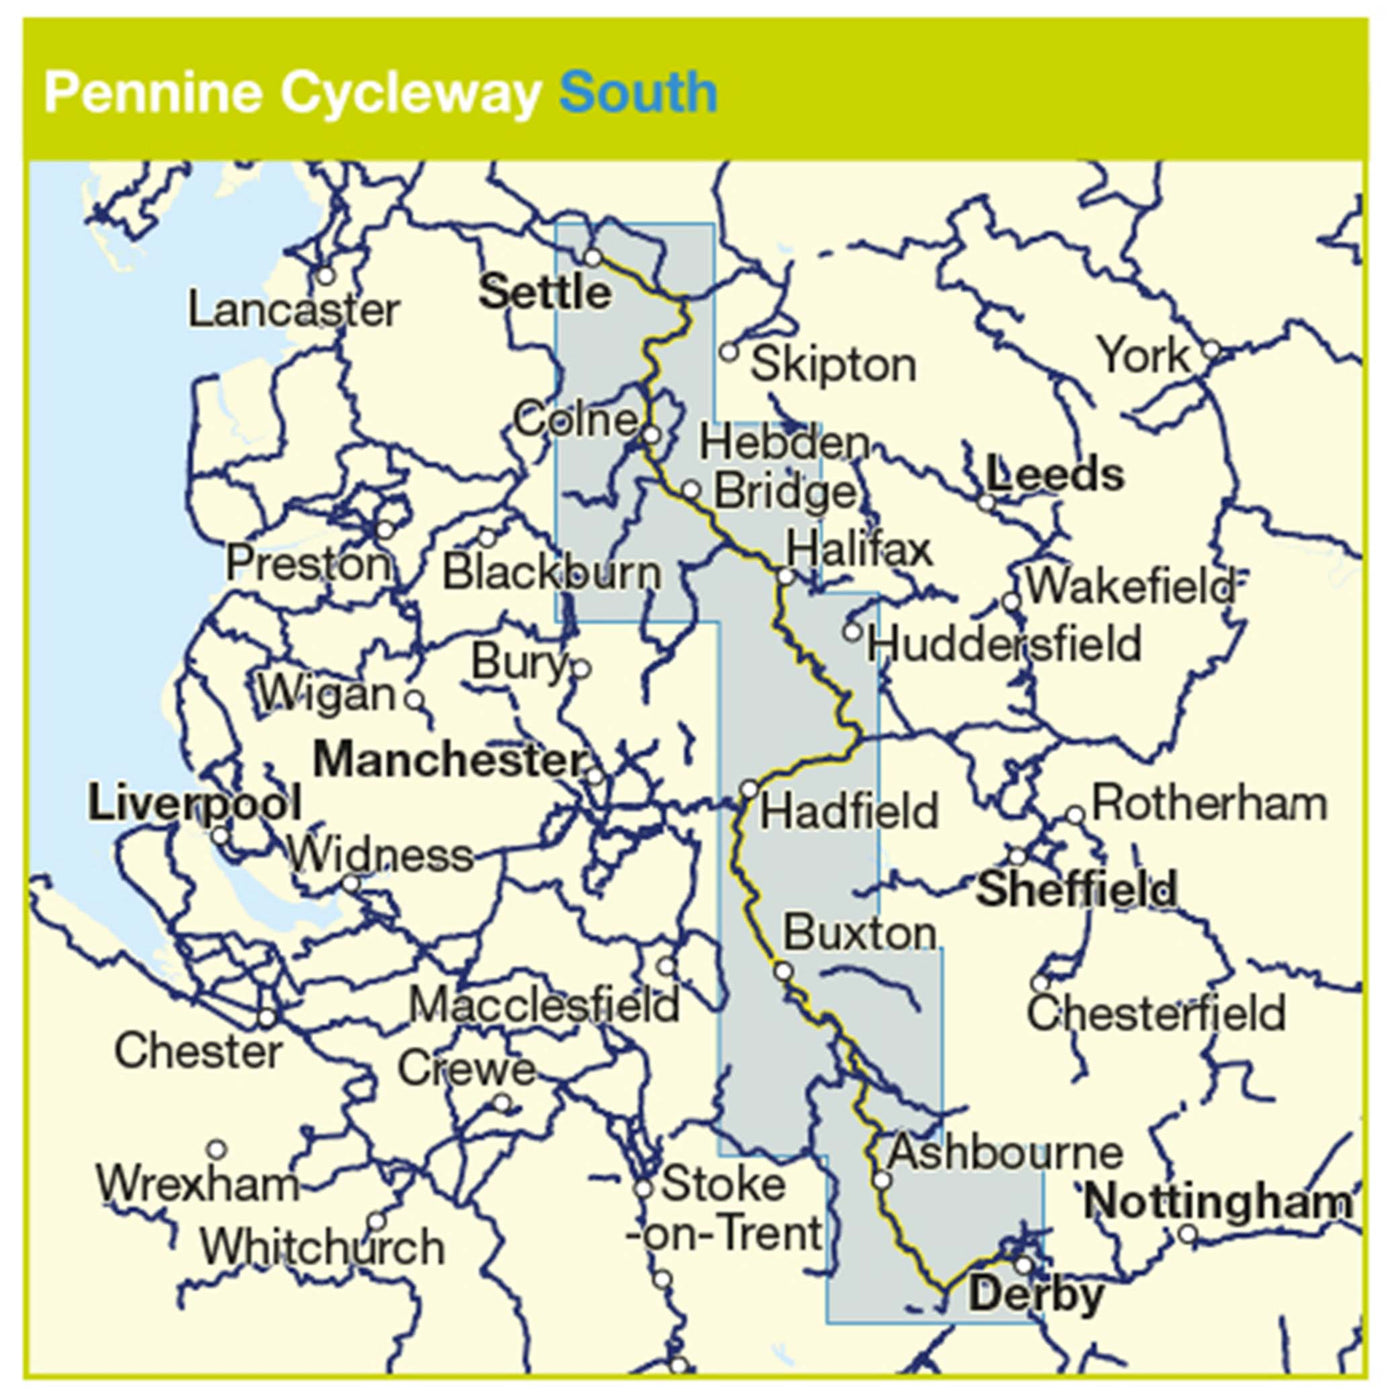 Pennine Cycleway South route coverage 